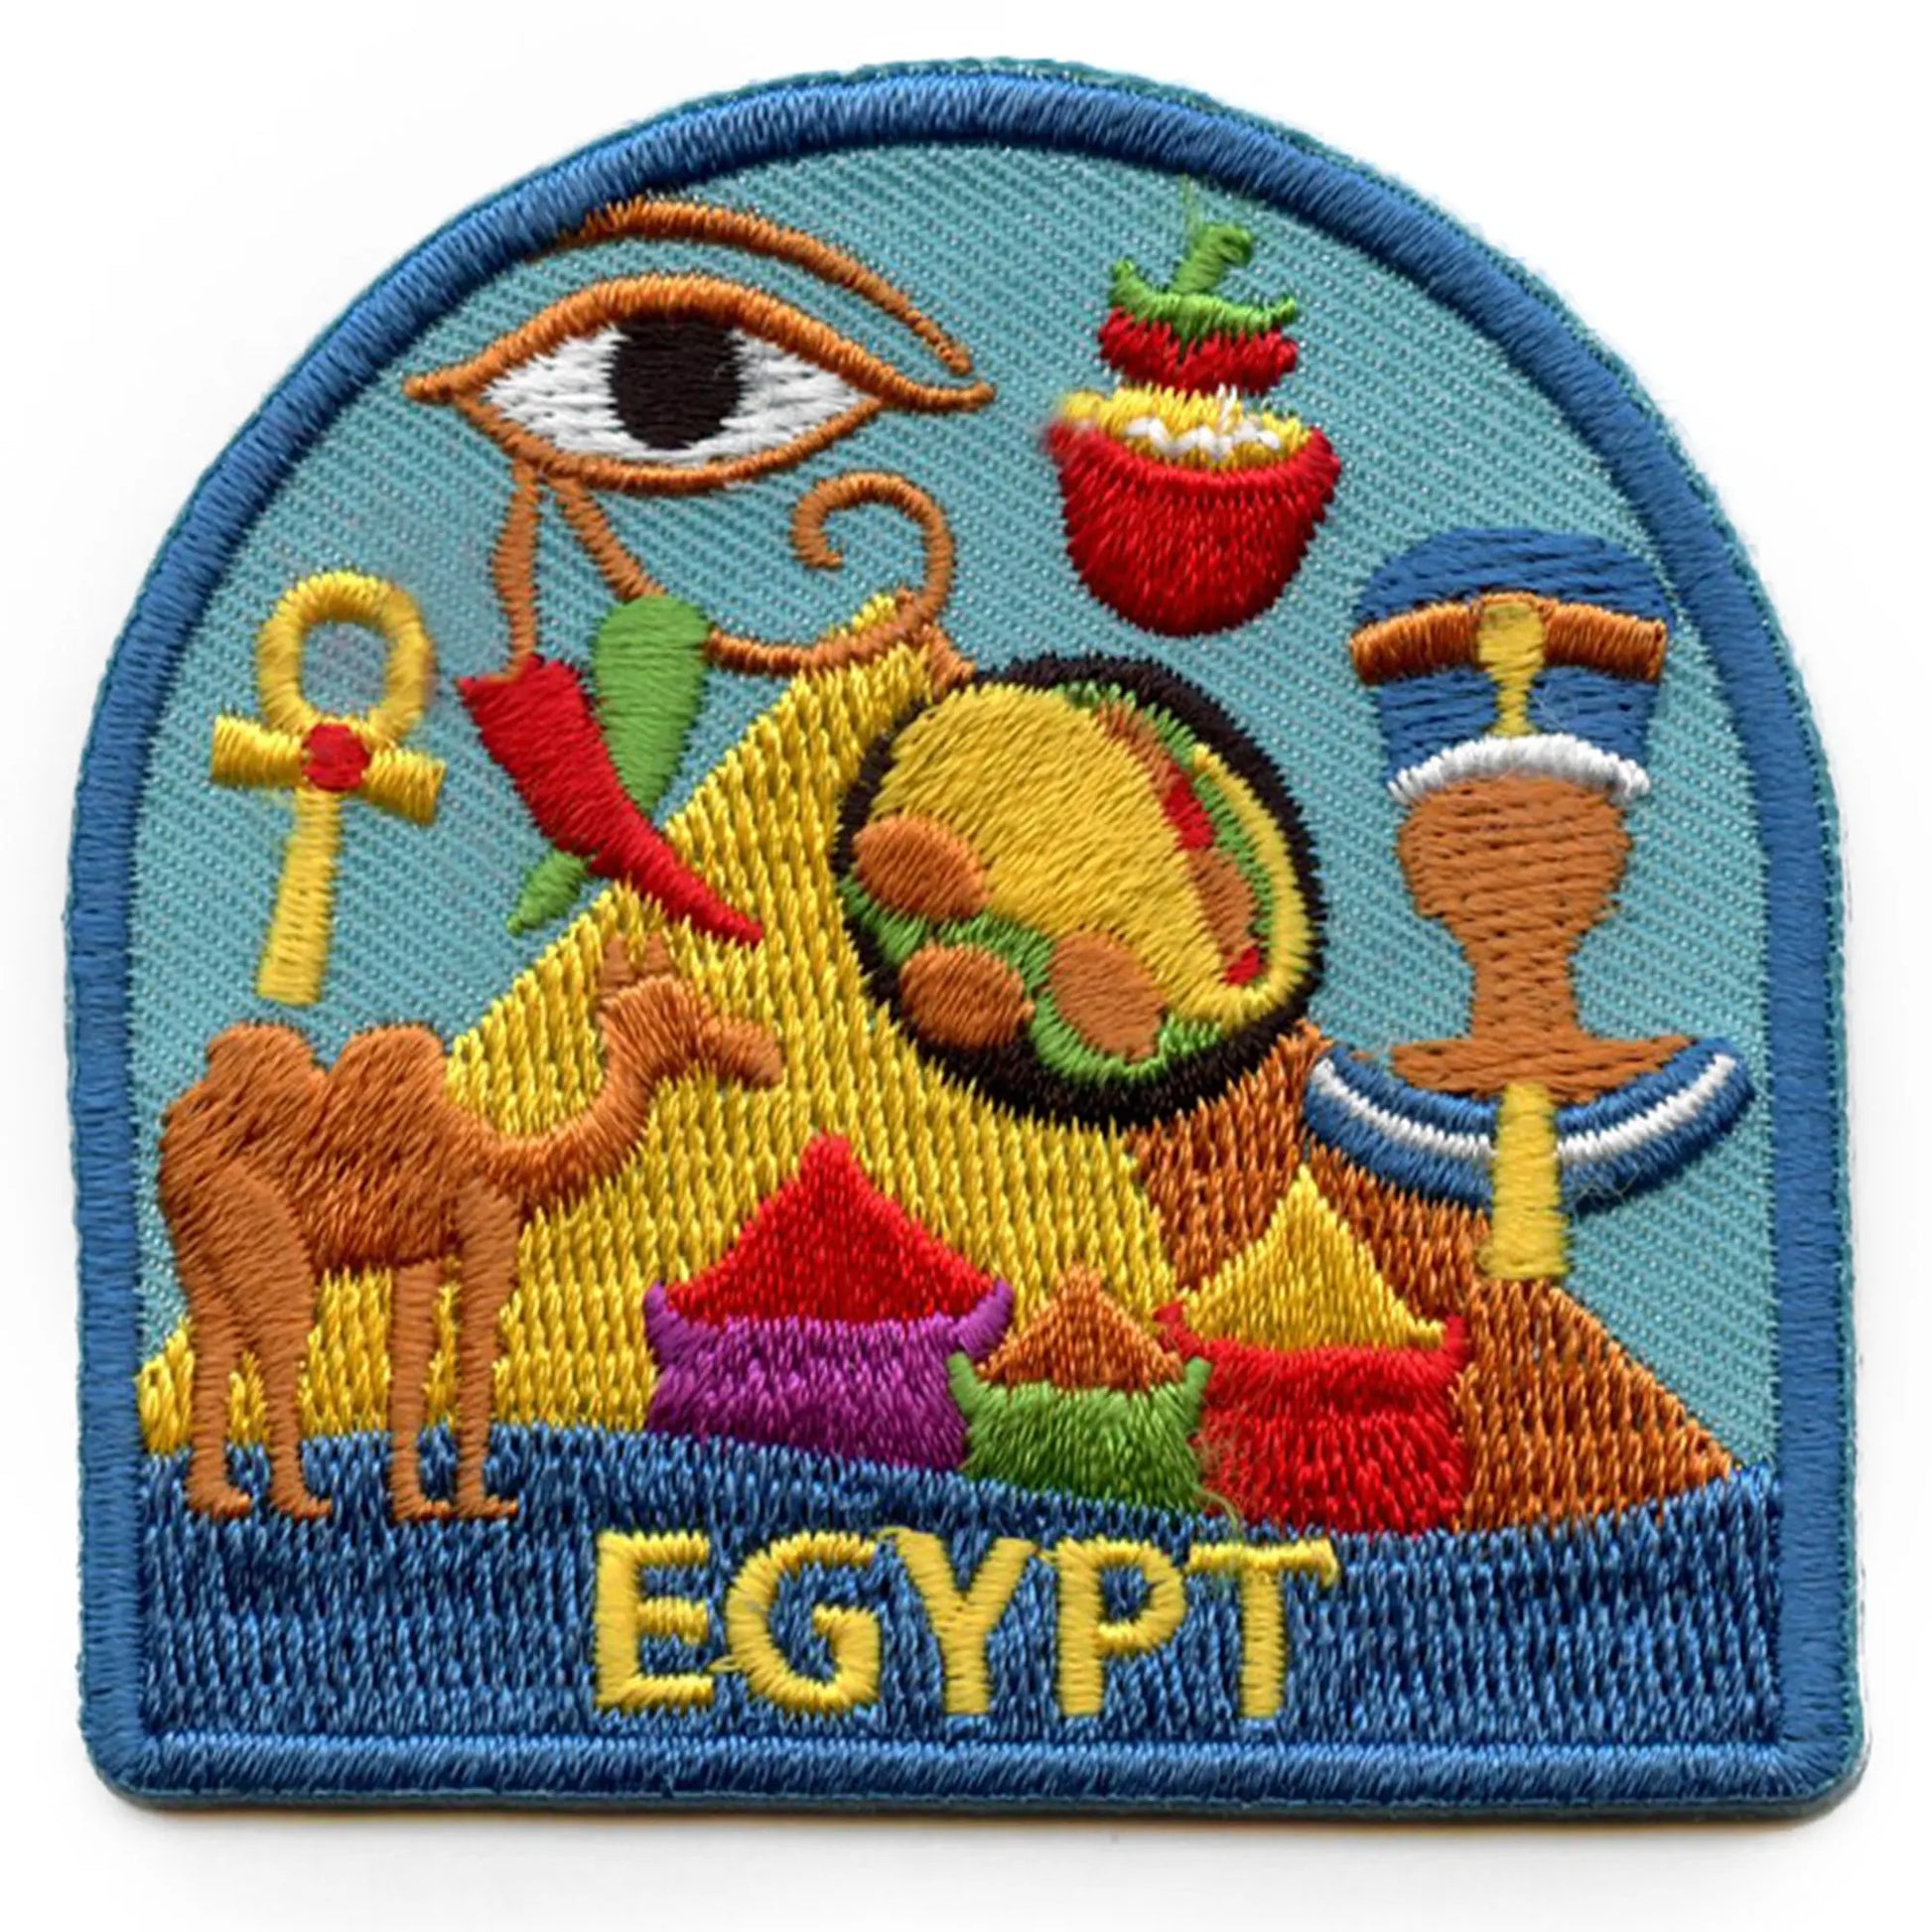 Egypt World Showcase Travel Patch Souvenir Sandy Vacation Embroidered Iron On